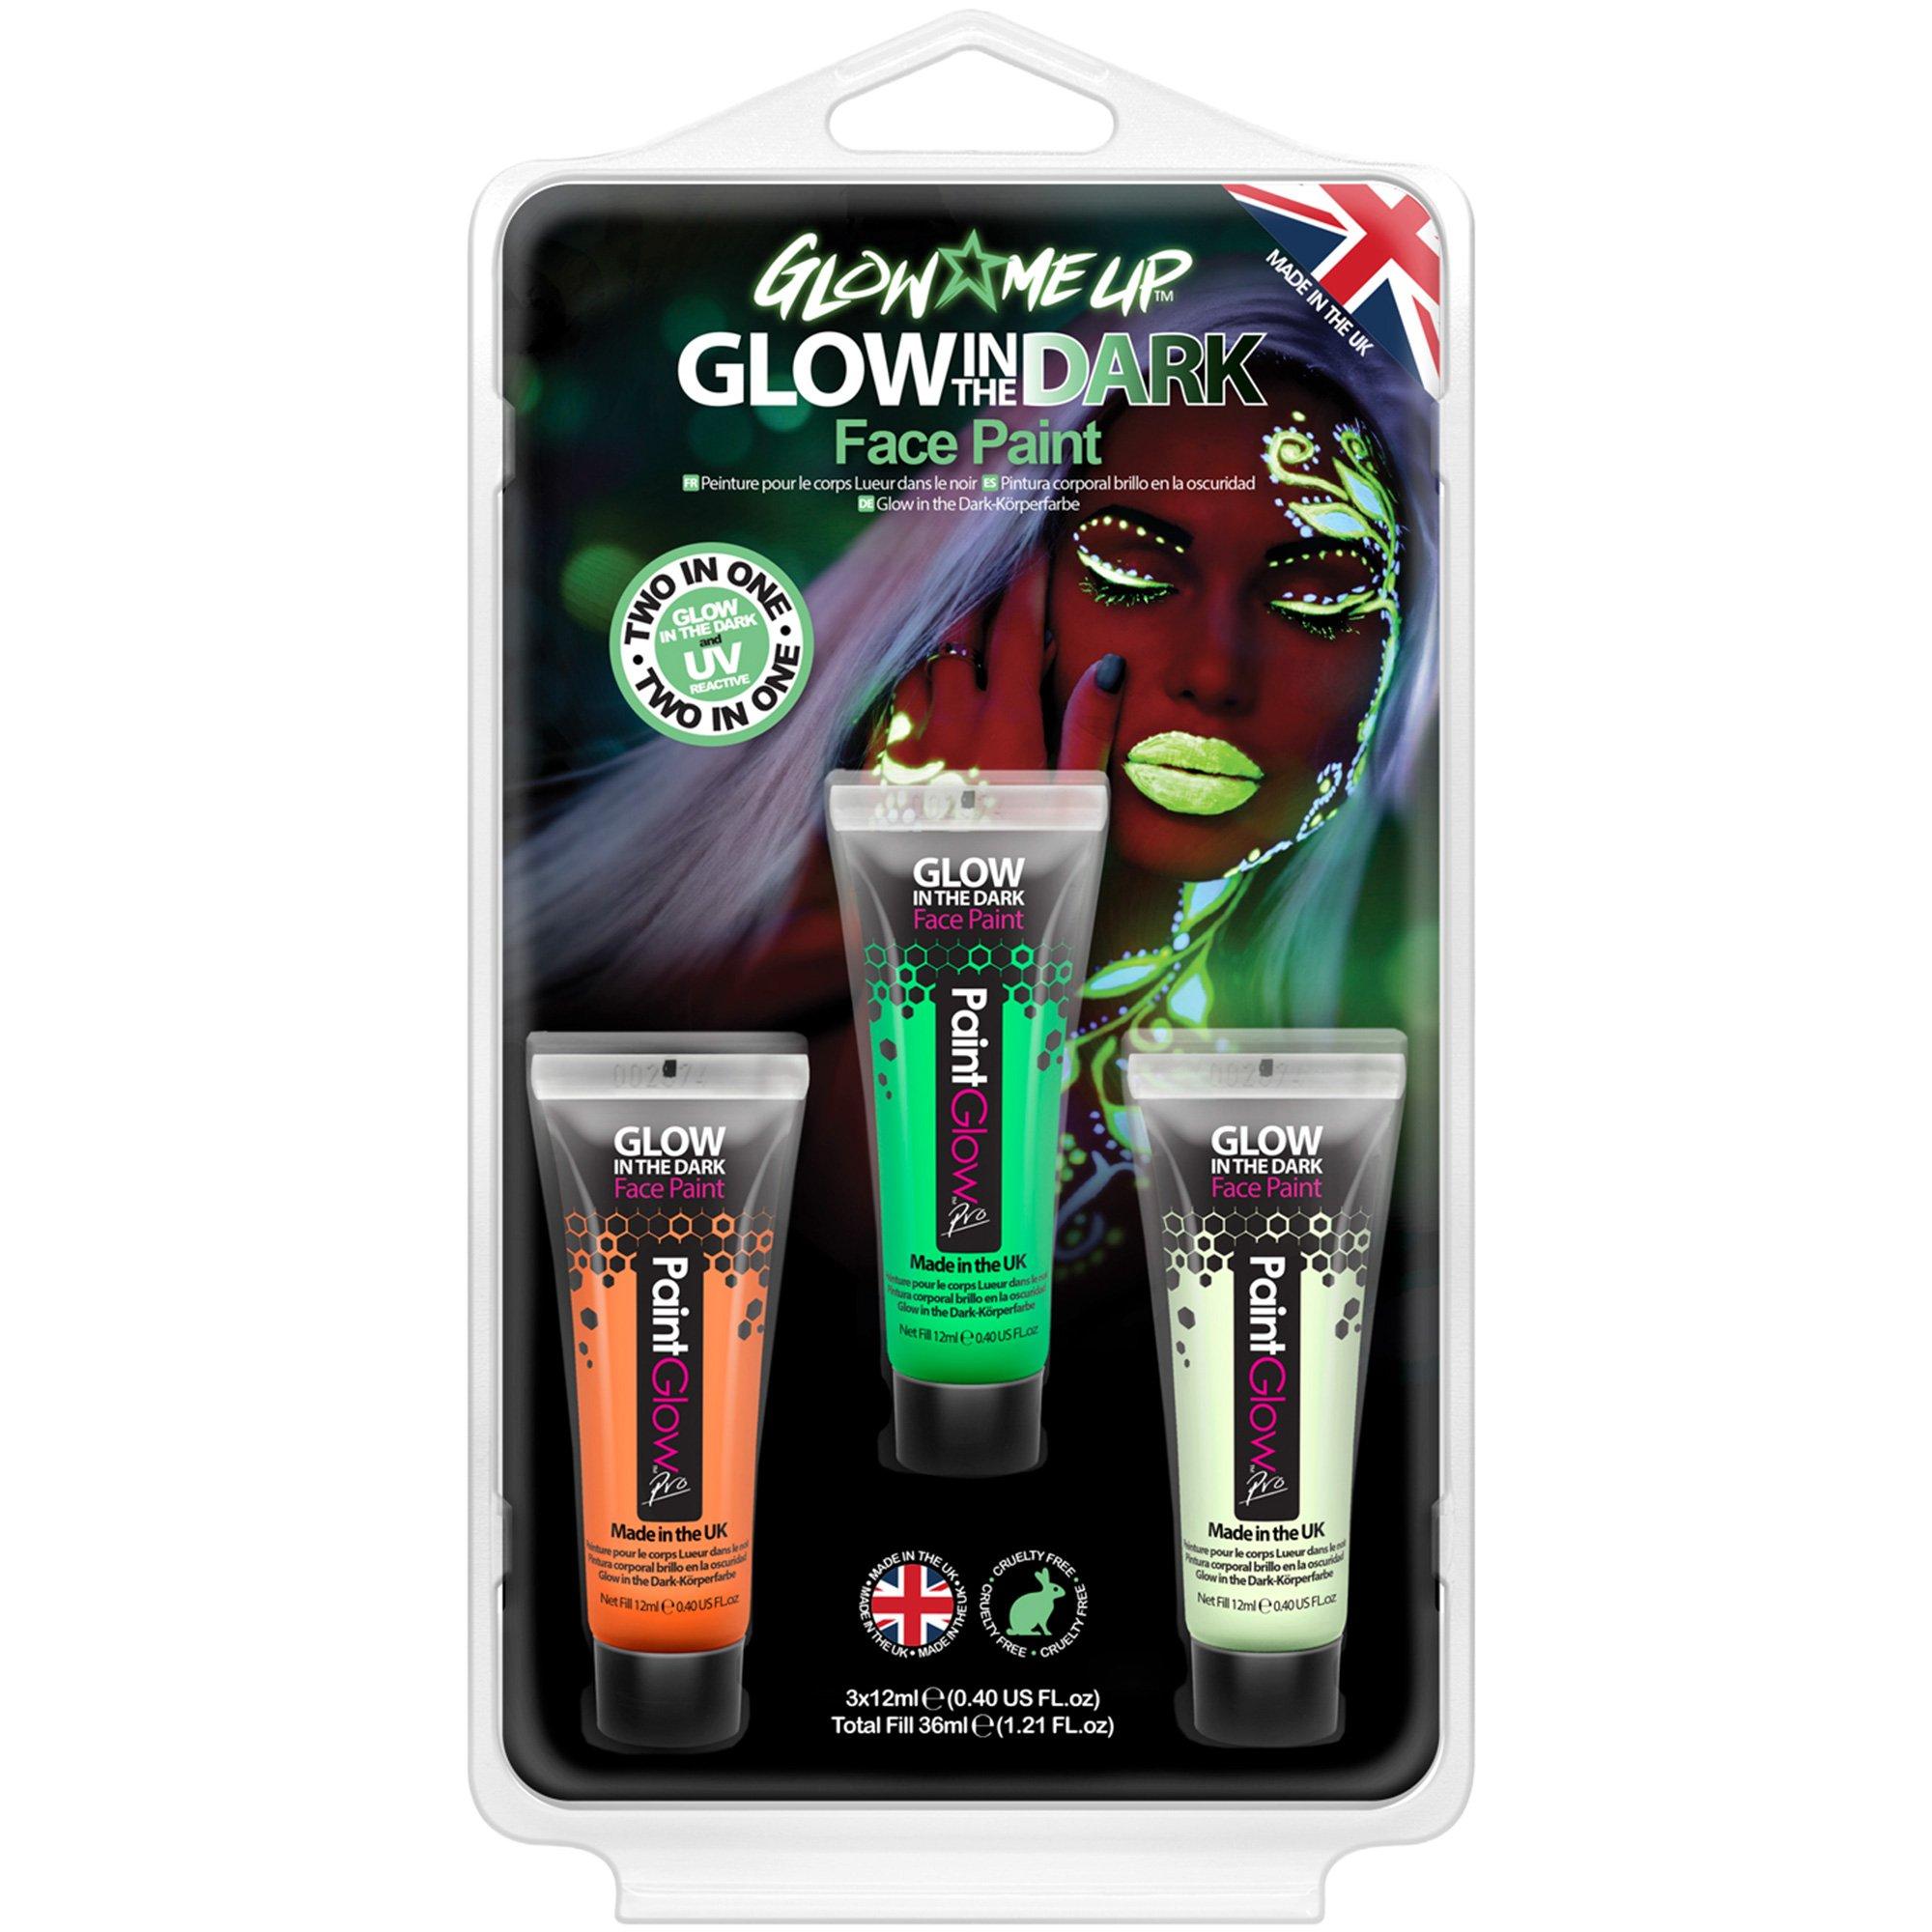 Glow in the dark face paint for the Fun glow run  Glow birthday party,  Neon party, Neon birthday party